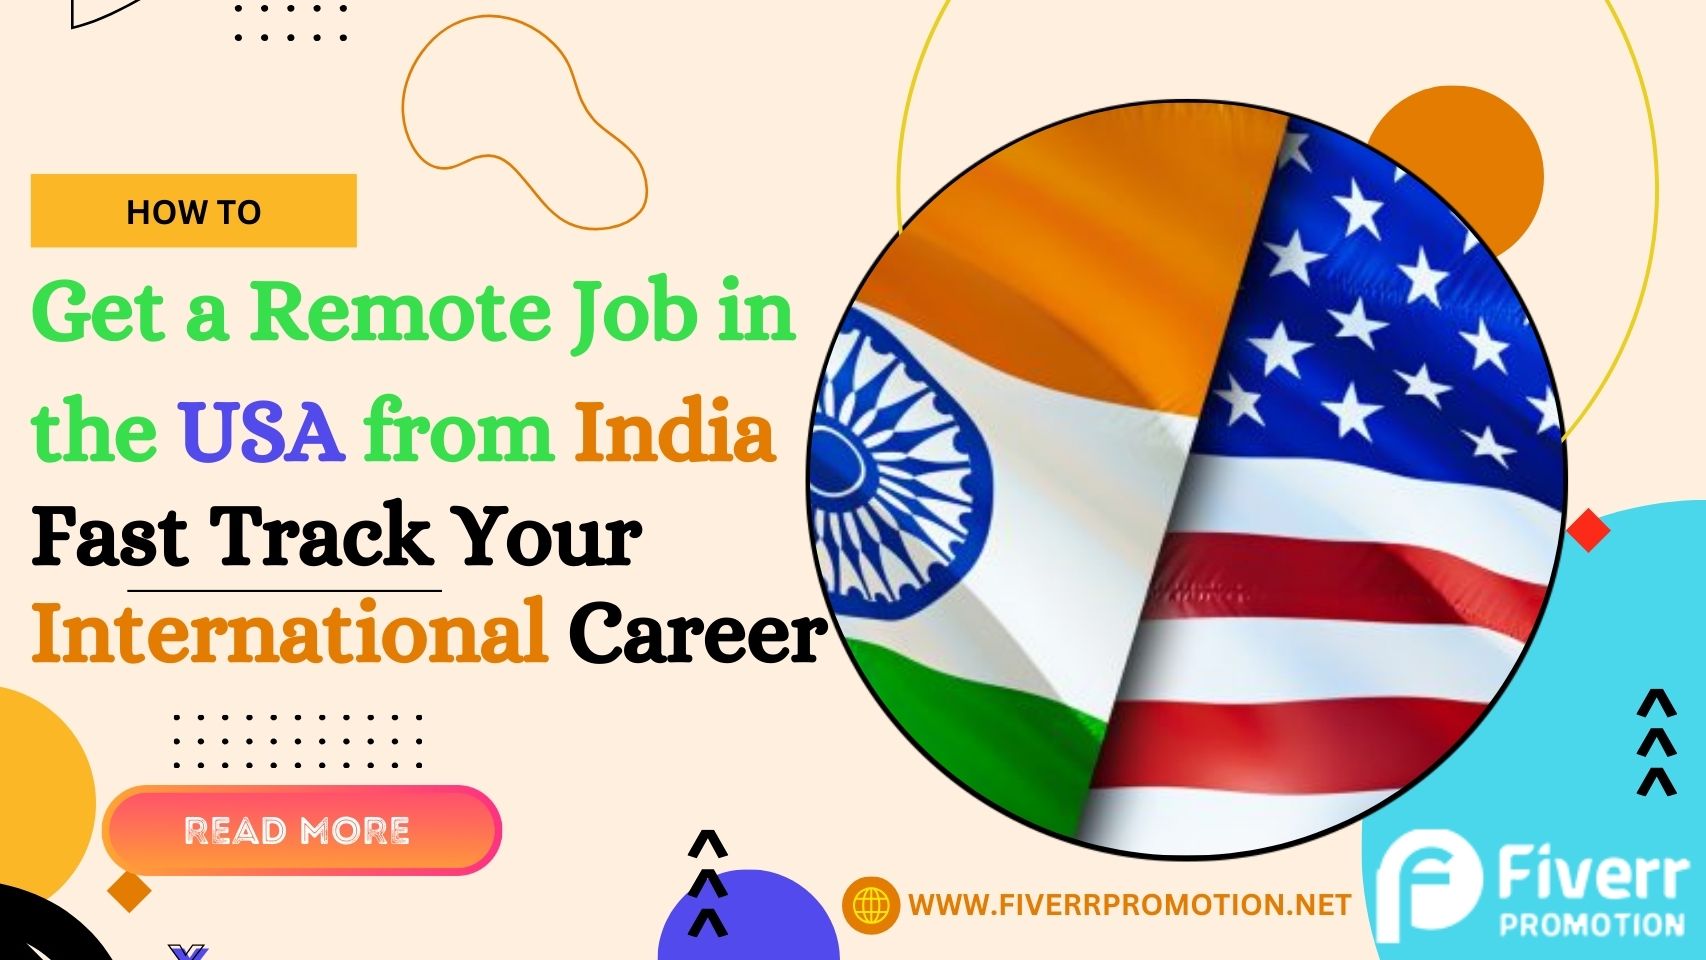 How to Get a Remote Job in the USA from India: Fast Track Your International Career